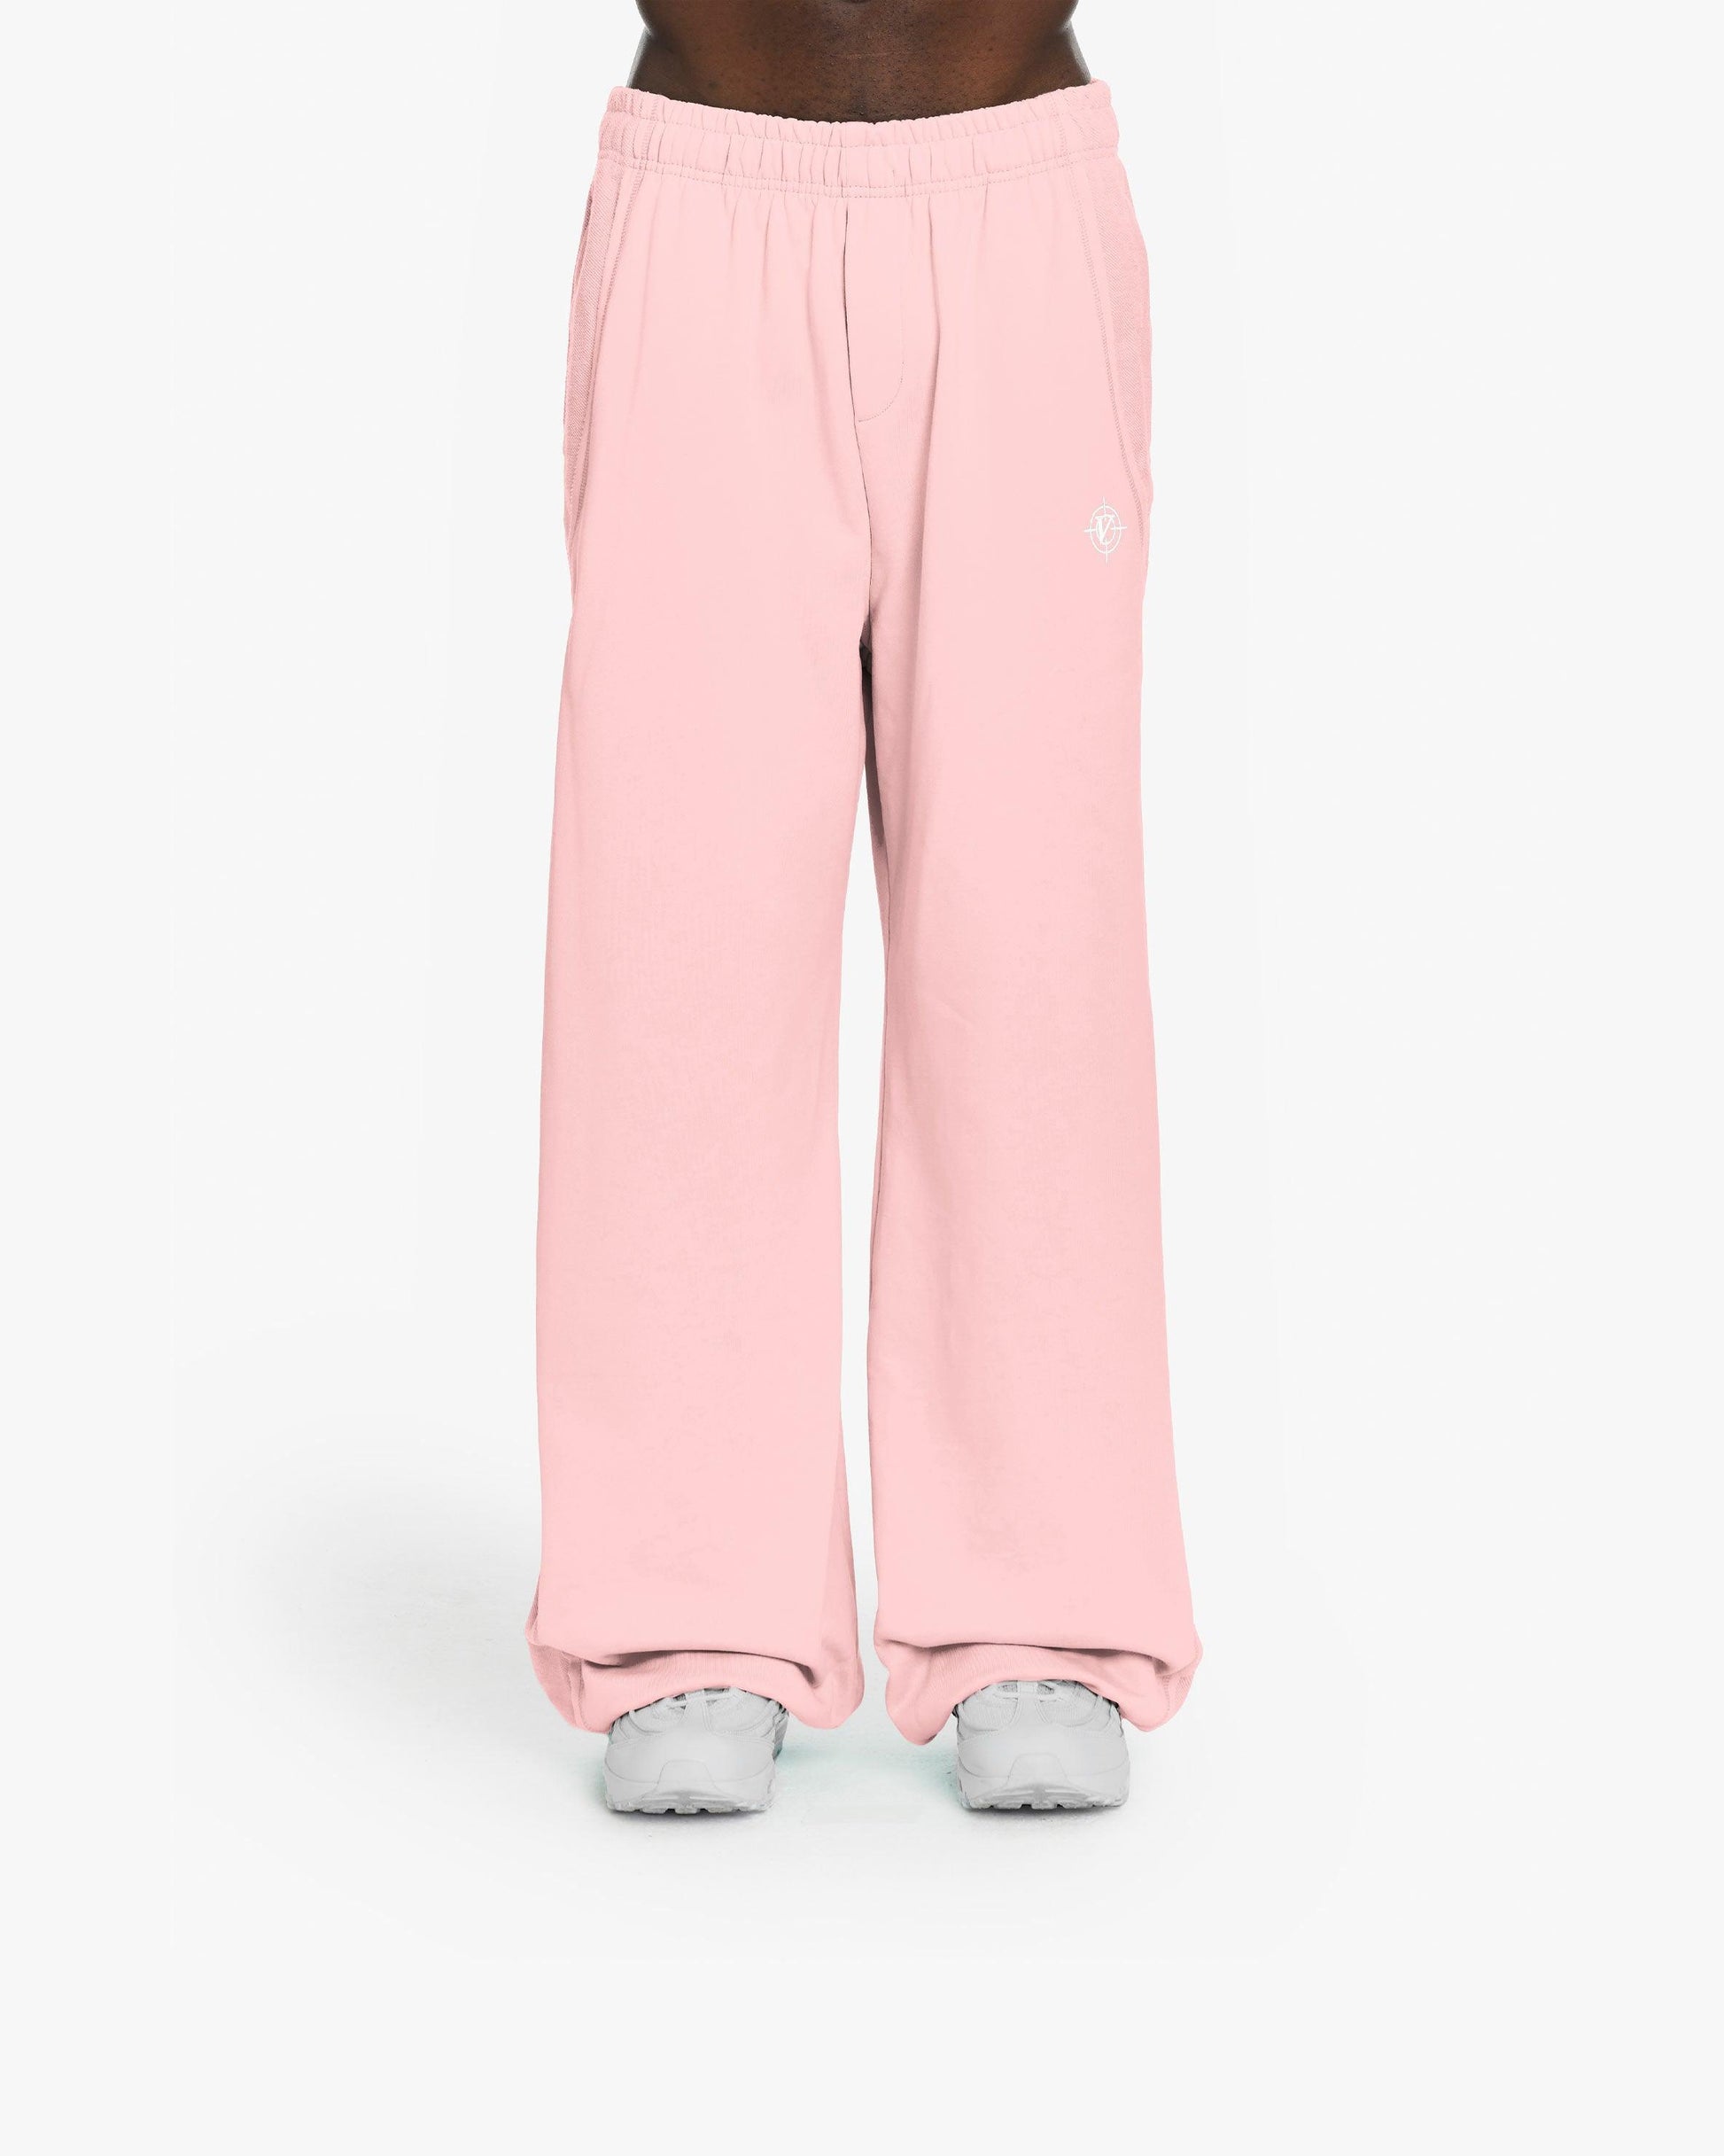 INSIDE OUT JOGGER PINK - VICINITY